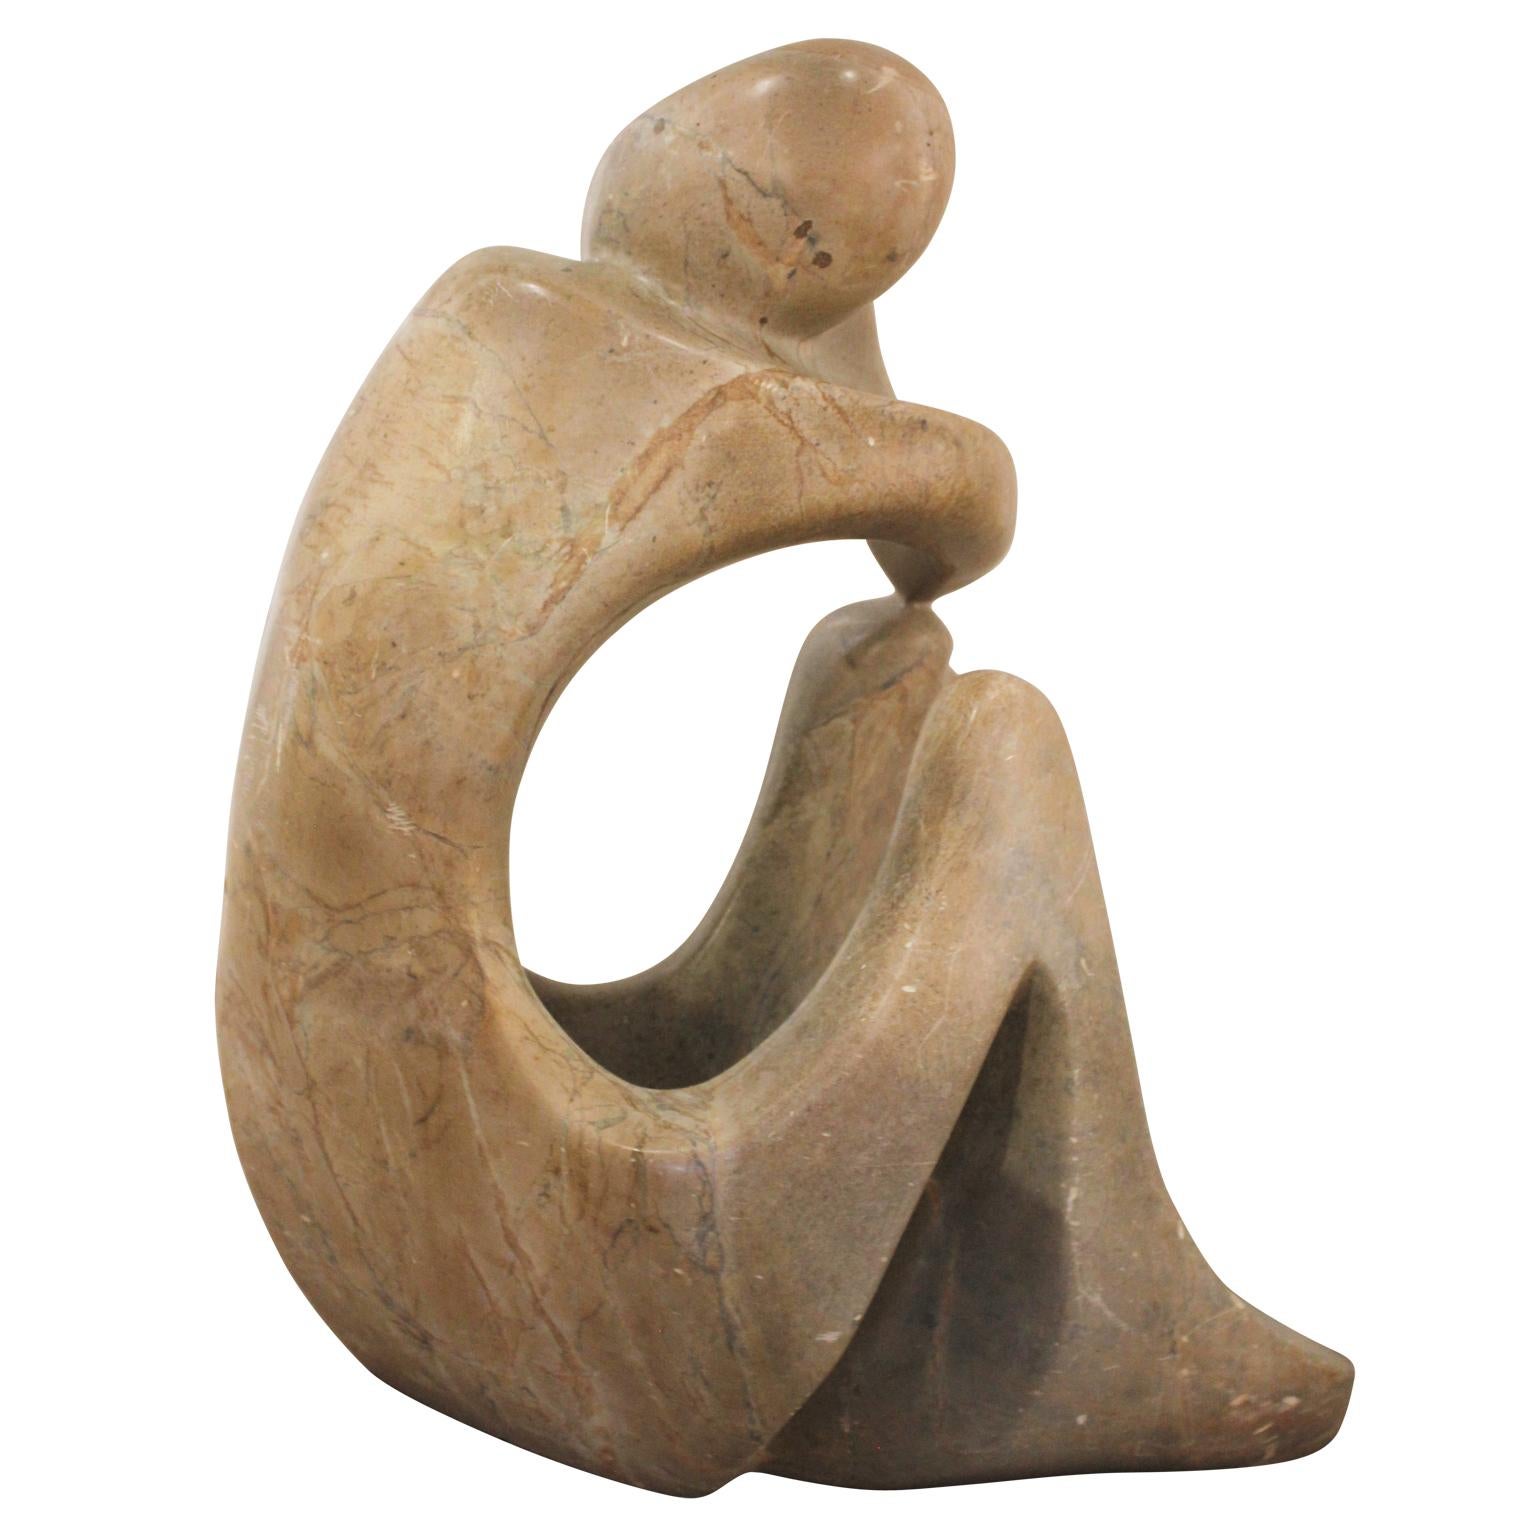 Seated Thinking Women in a Long Dress - Naturalistic Sculpture by Jose Zacarias